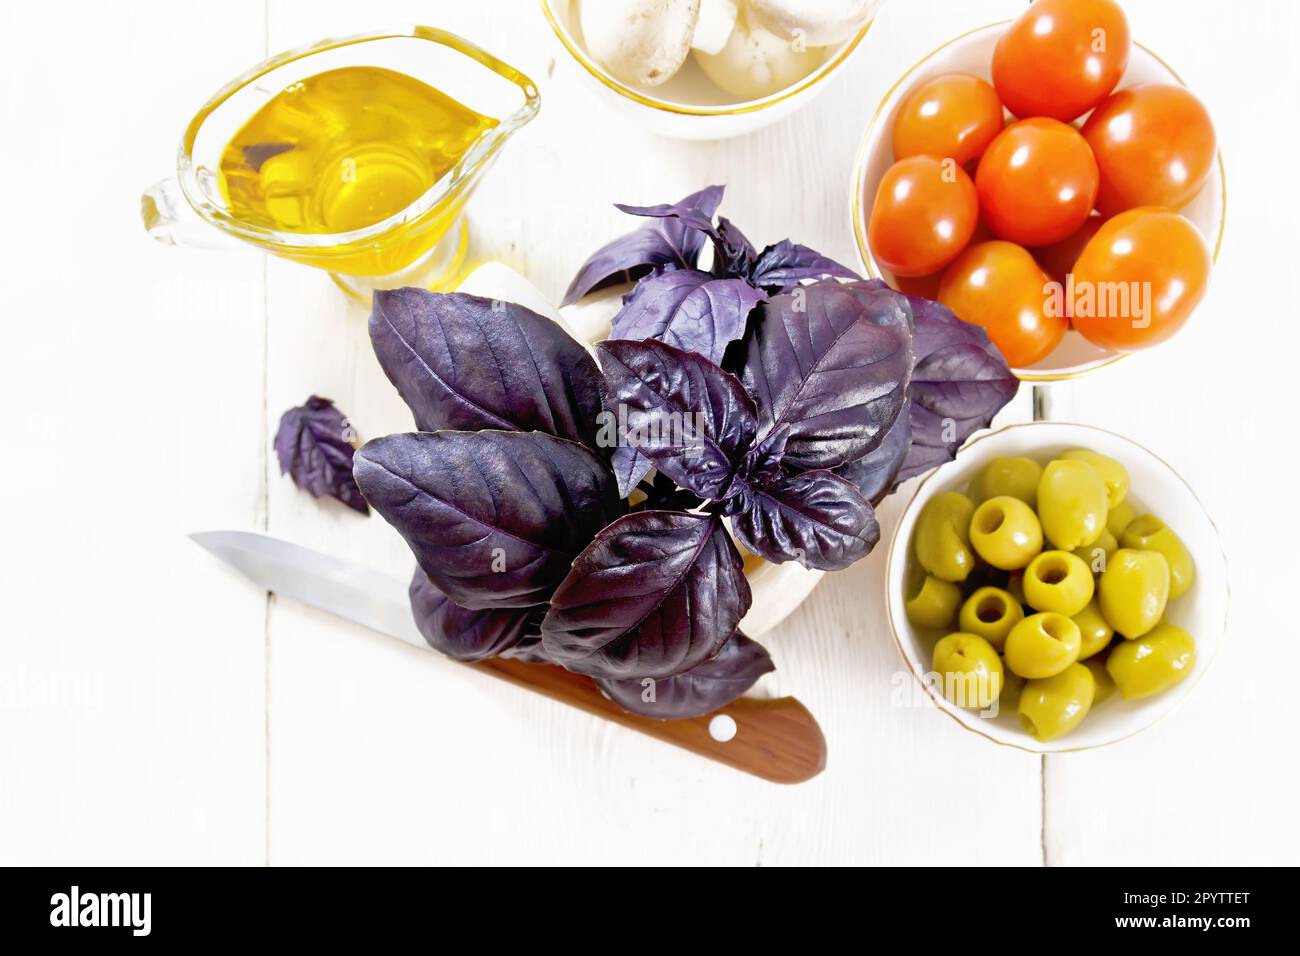 Fresh purple basil in a mortar, olives, tomatoes and champignons in bowls, vegetable oil in gravy boat and a knife on light wooden board background fr Stock Photo